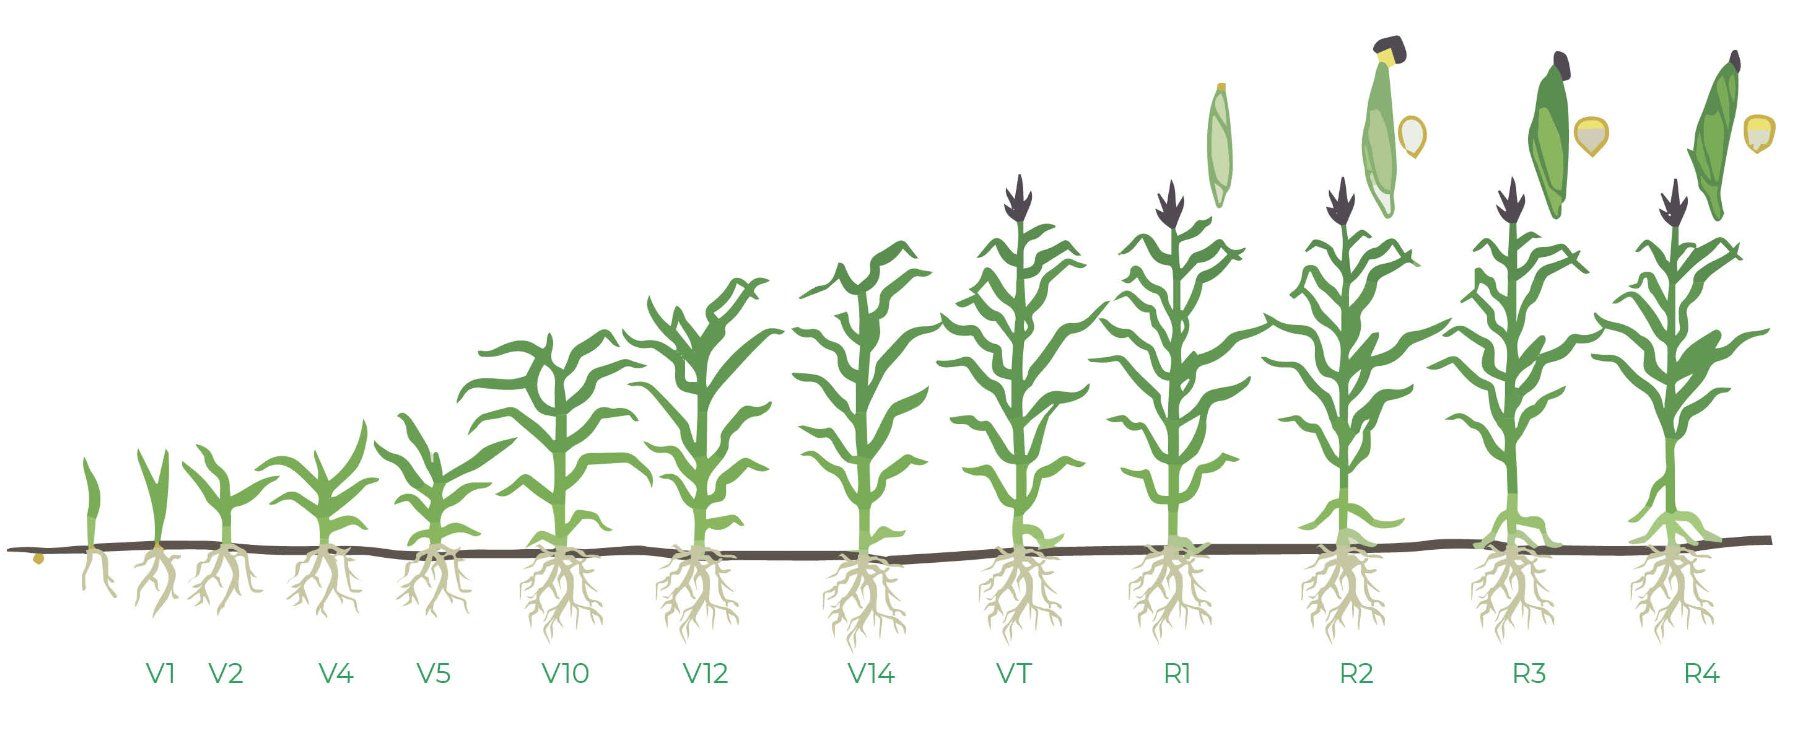 Corn Growth Stages